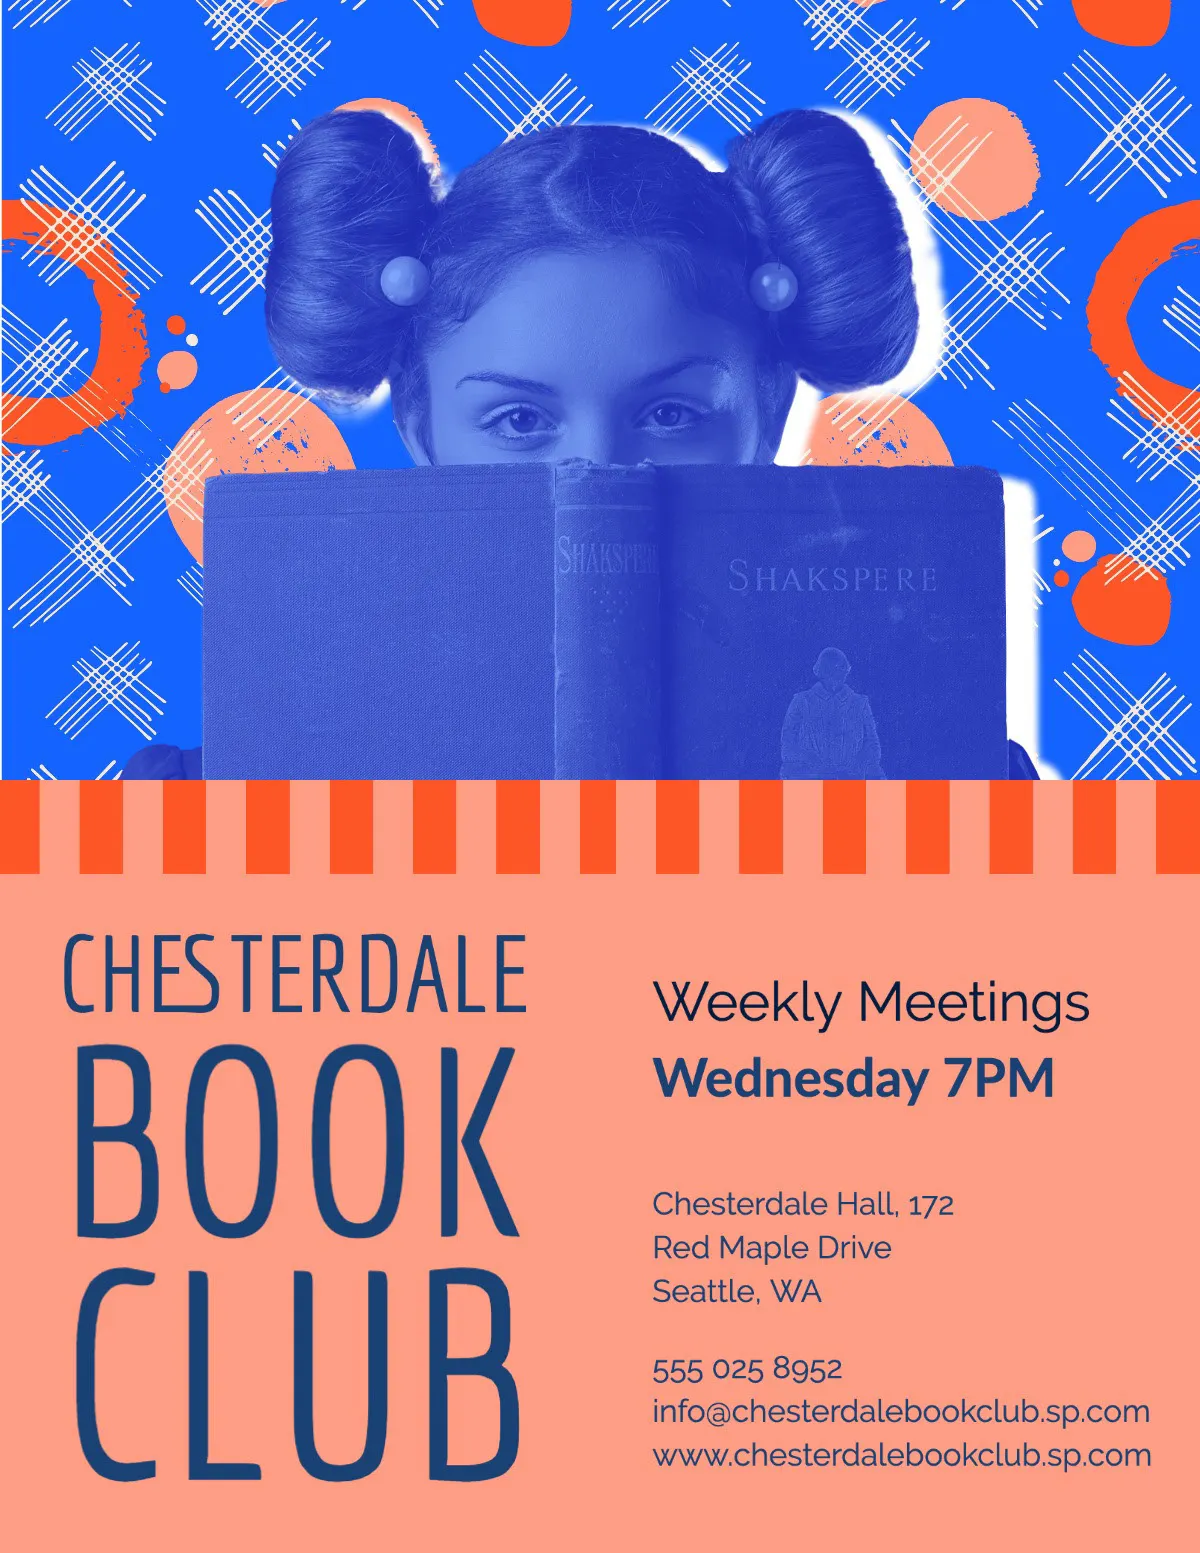 Orange, Red And Blue Book Club Flyer